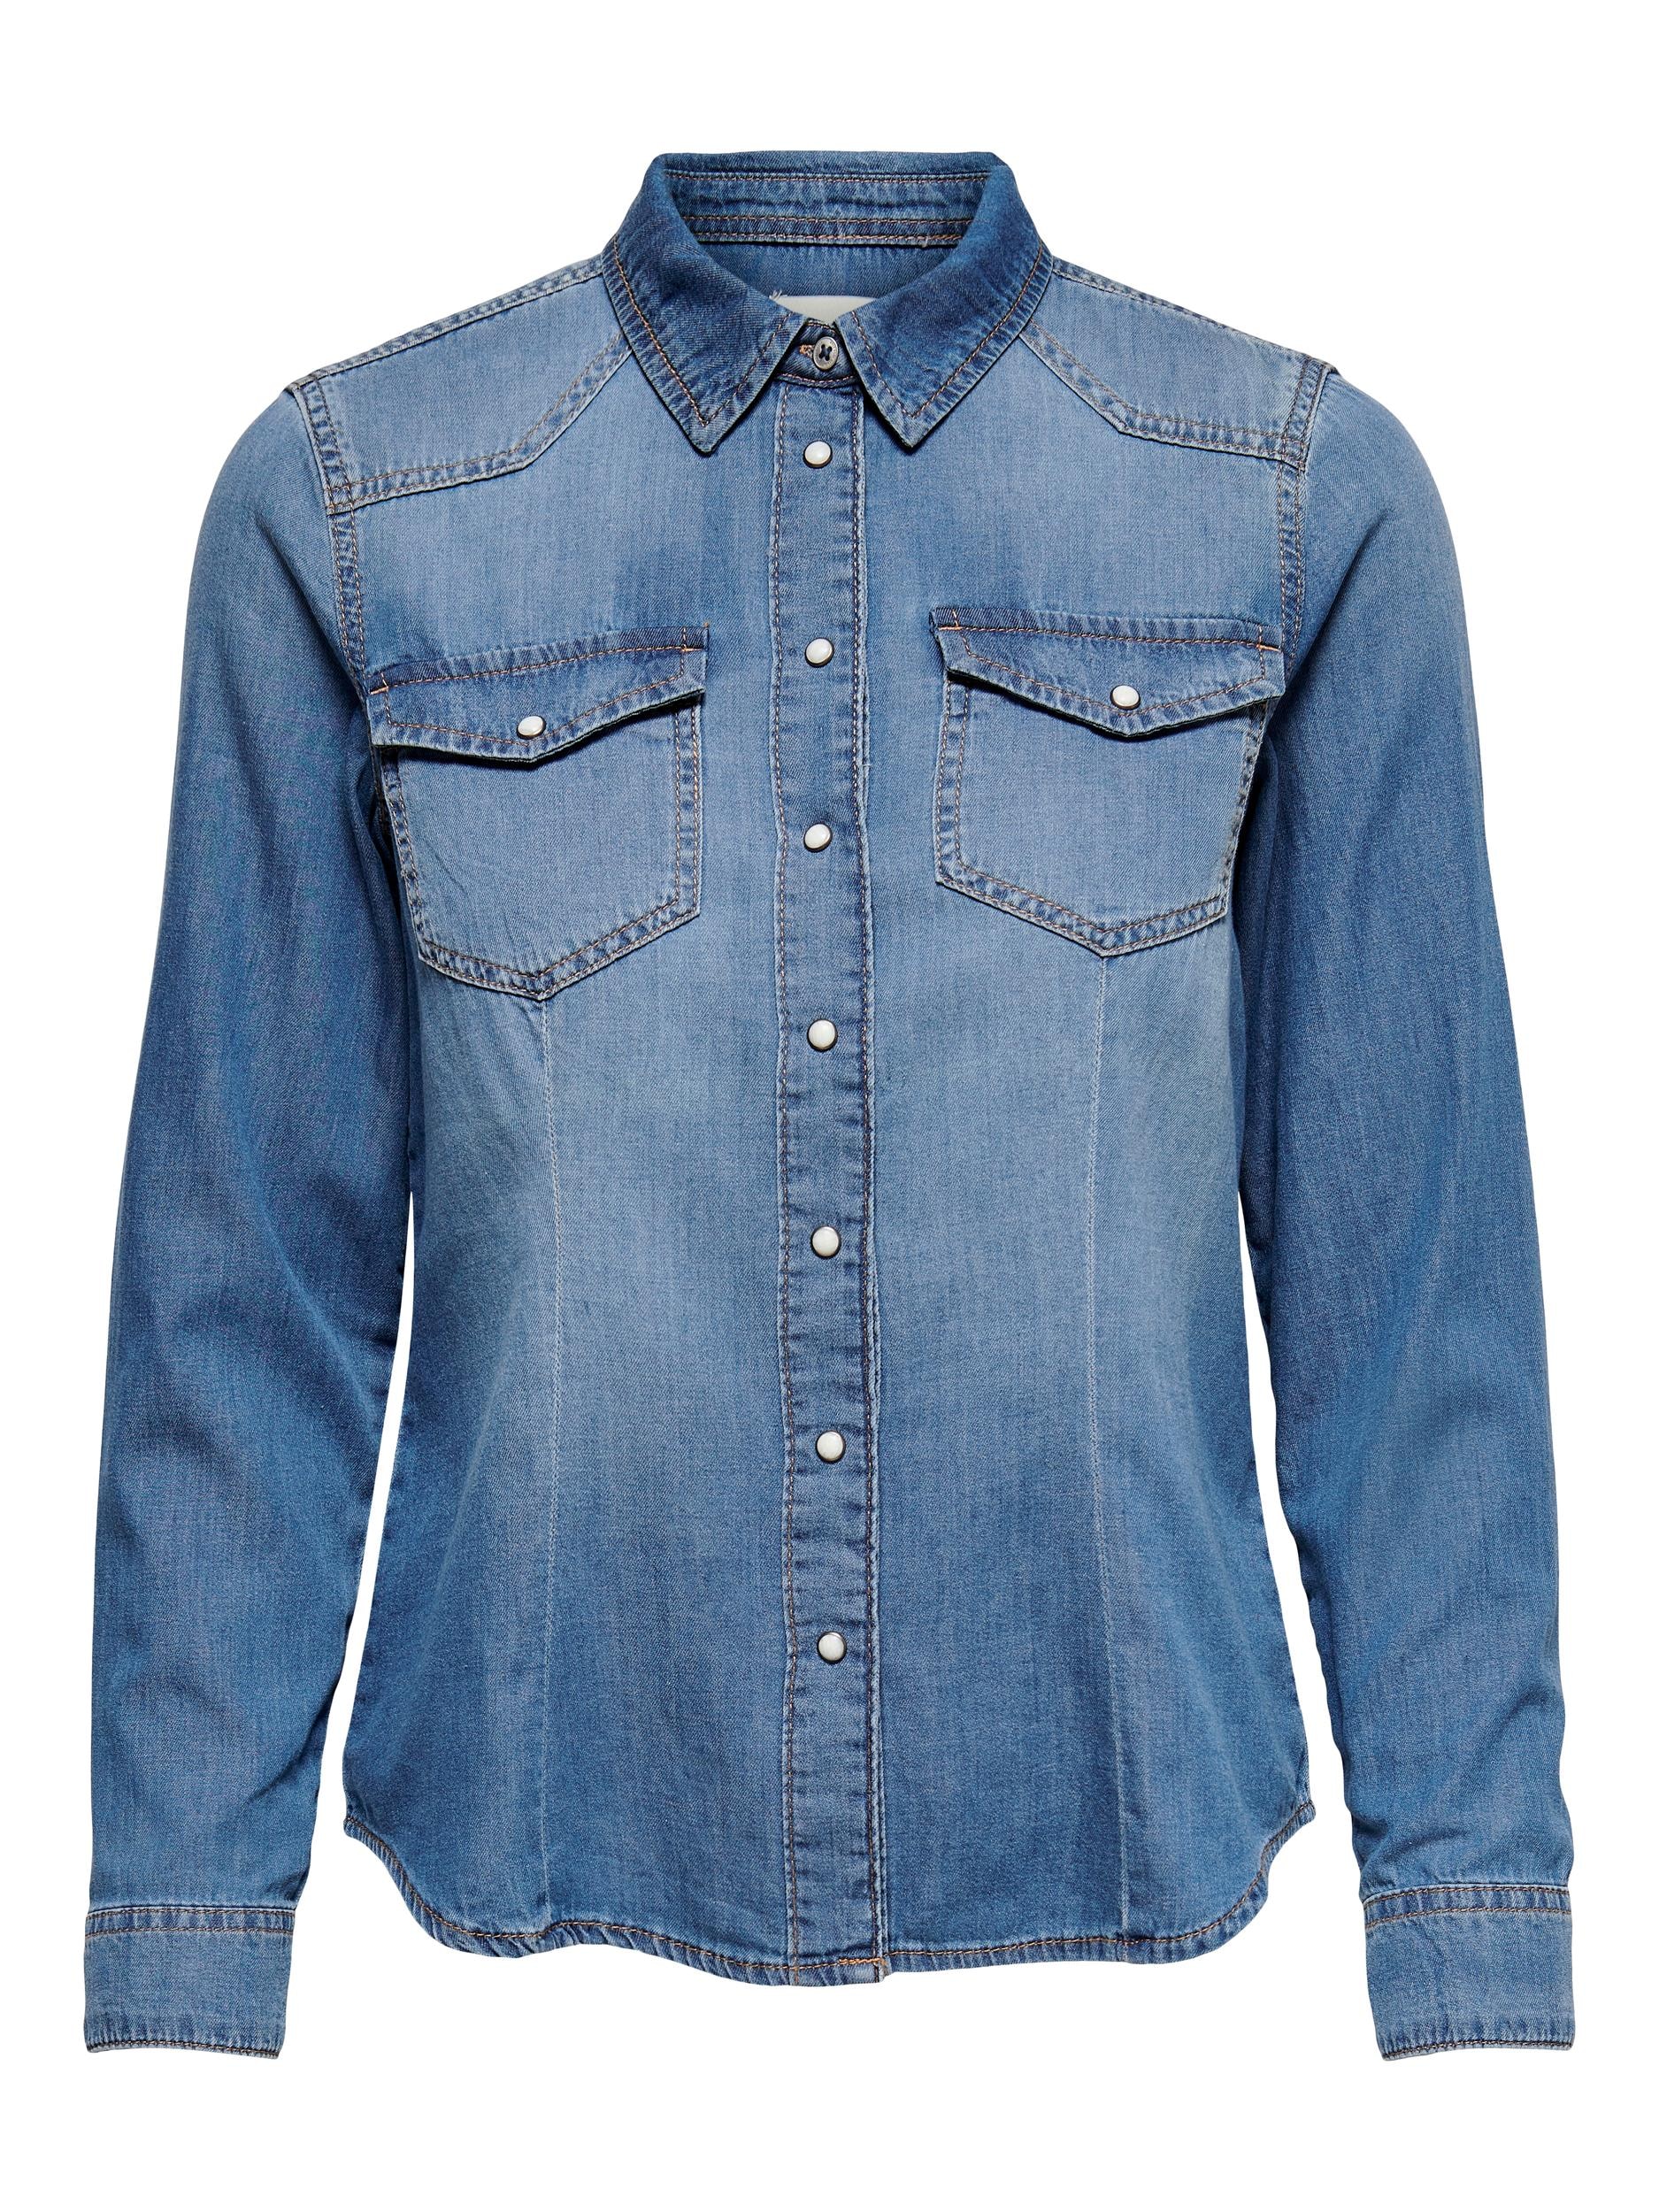 »ONLROCK DNM bei SHIRT« ♕ IT ONLY LS Jeansbluse